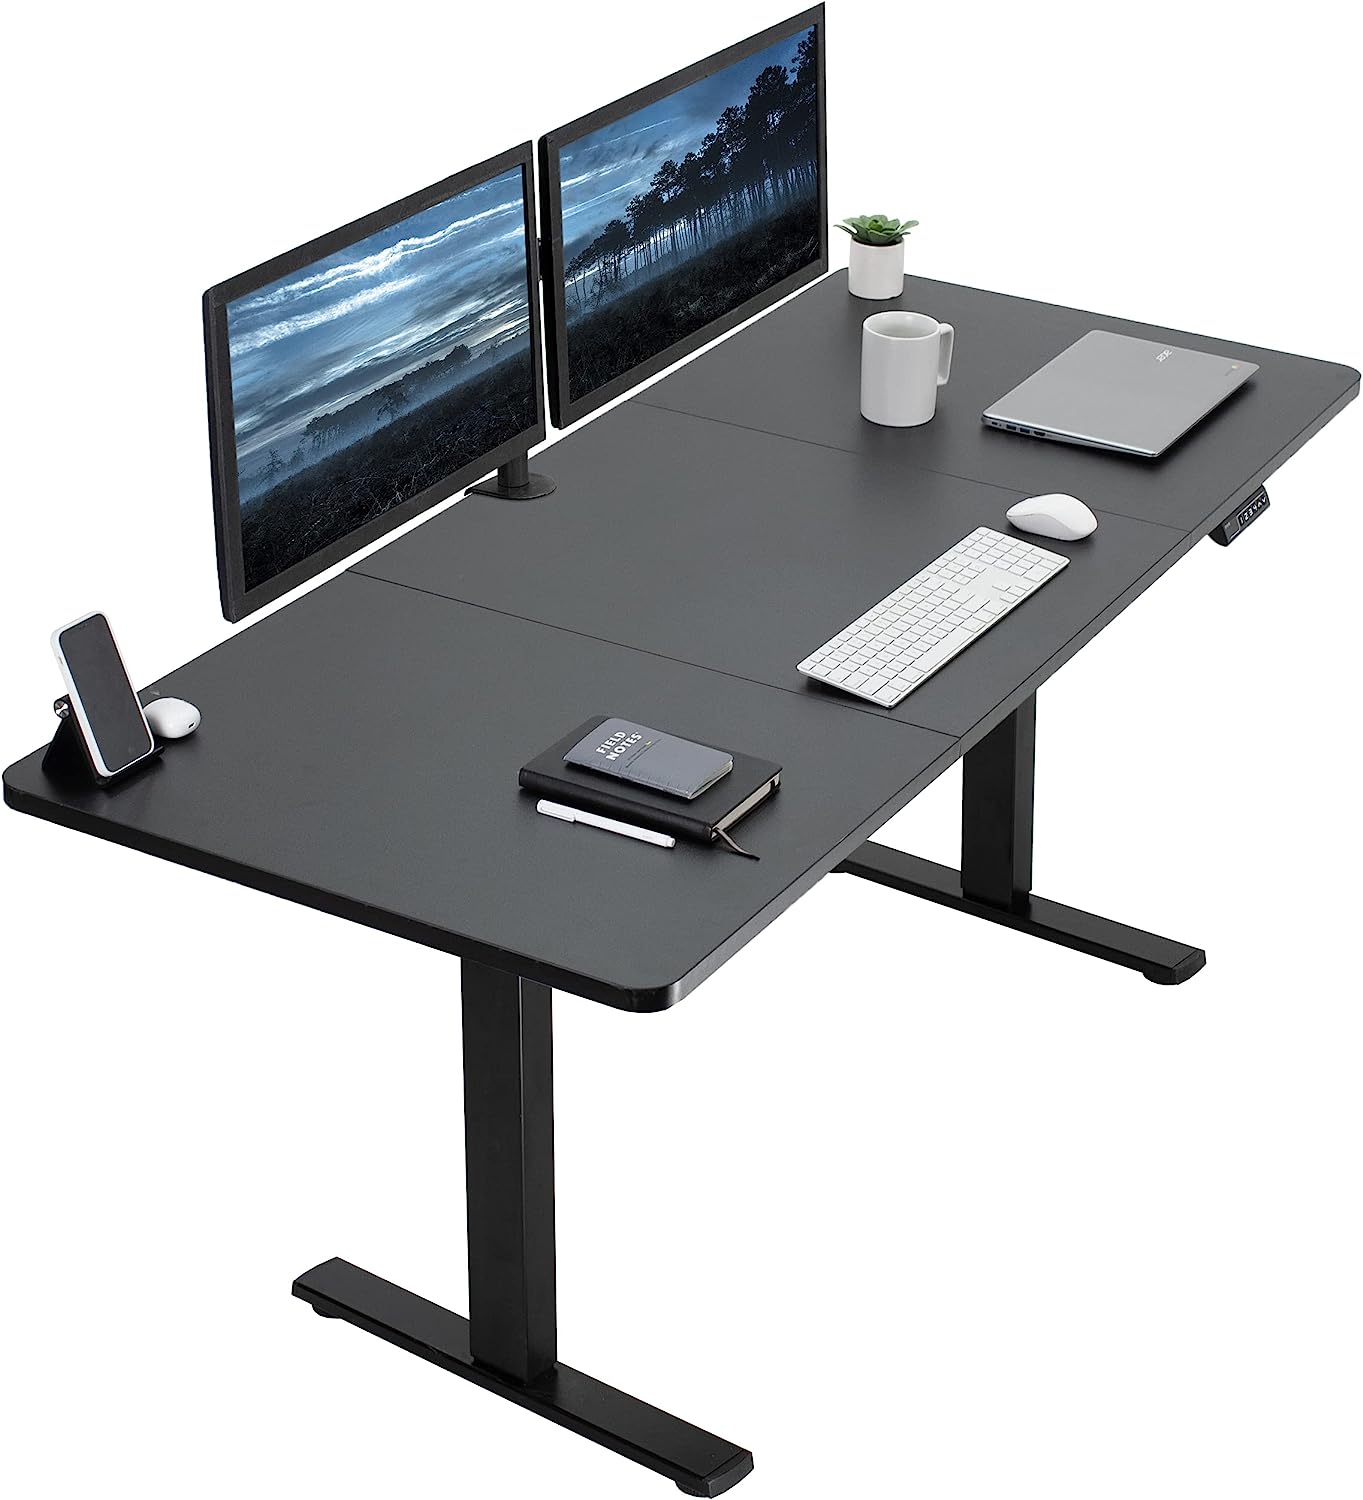 The Advantages of a Standing Desk